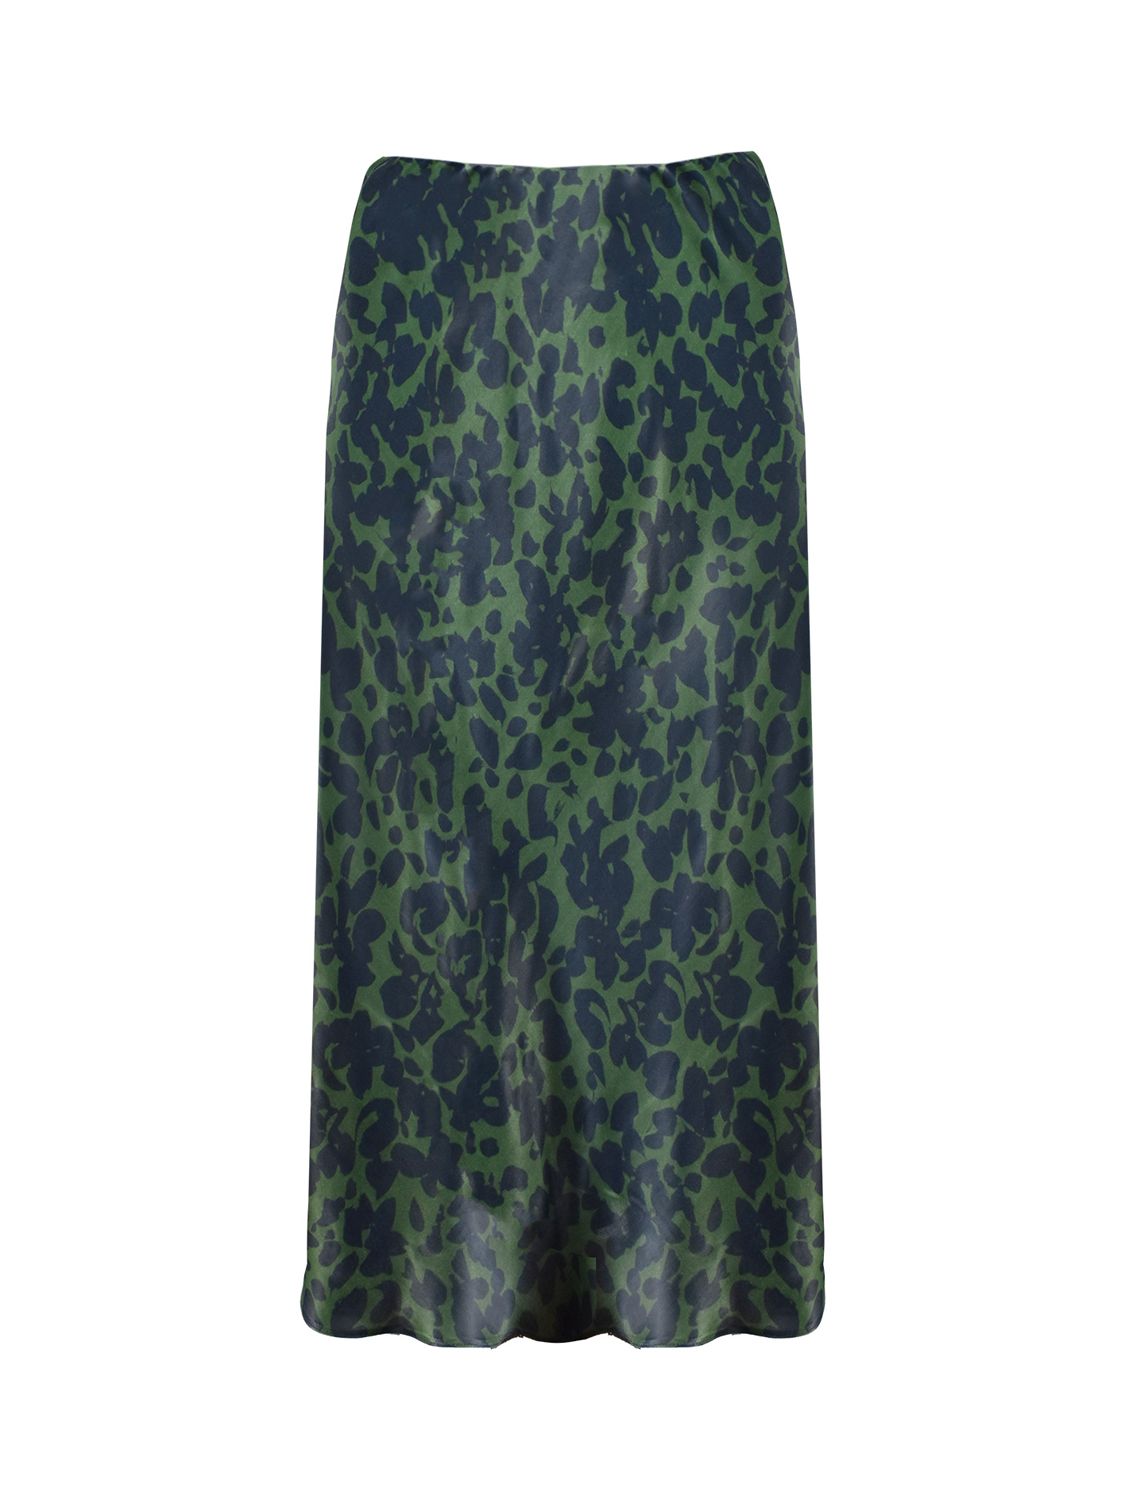 Buy Live Unlimited Curve Abstract Floral Print Midi Skirt, Khaki Online at johnlewis.com